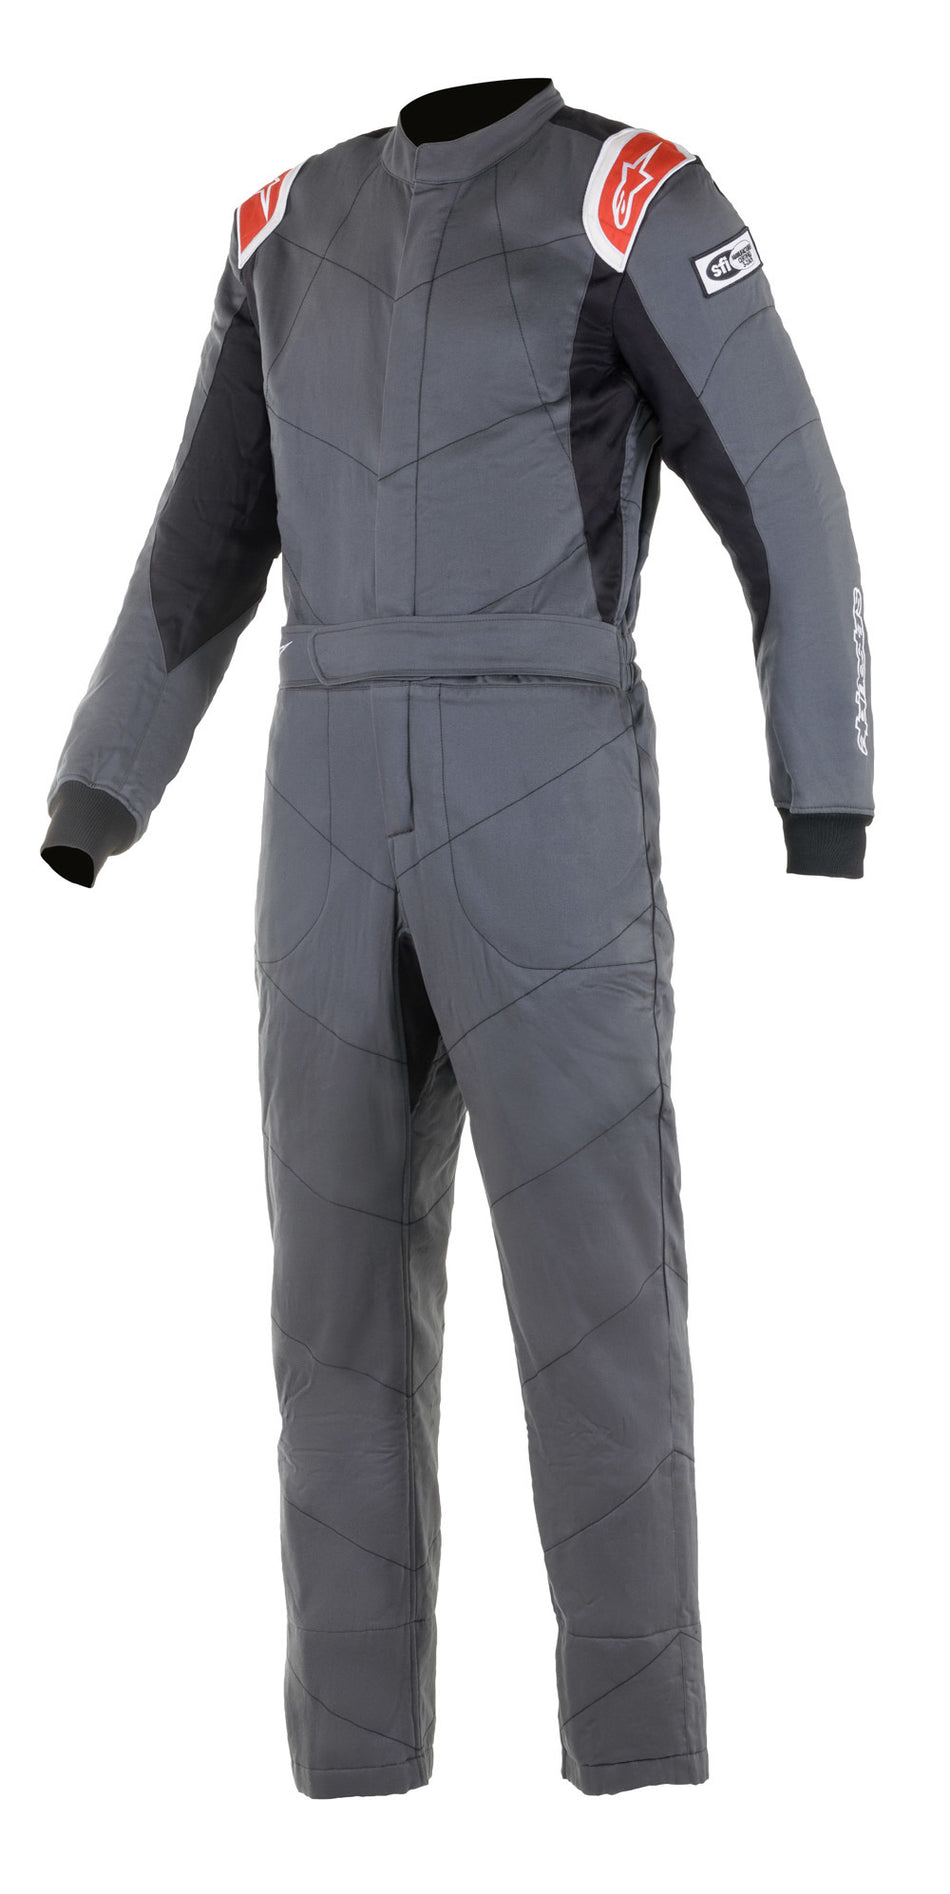 Driving Suit - Knoxville V2 - 1-Piece - SFI 3.2A/5 - Boot-Cut - Triple Layer - Fire Retardant Fabric - Gray / Red - Size 66 - 2X-Large / 3X-Large - Each